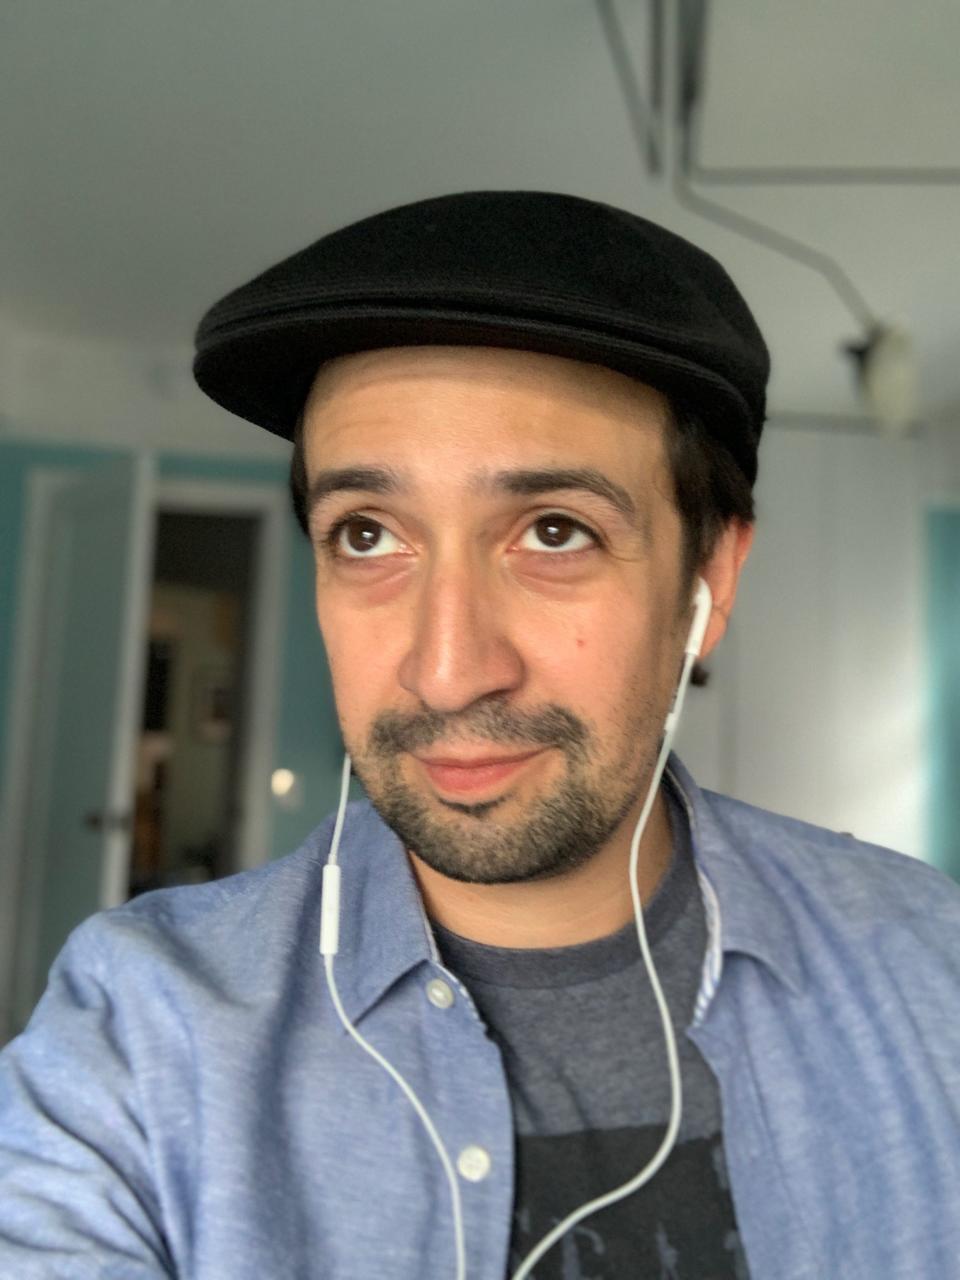 Lin-Manuel Miranda has been locked down in New York with his wife, two sons and the in-laws.